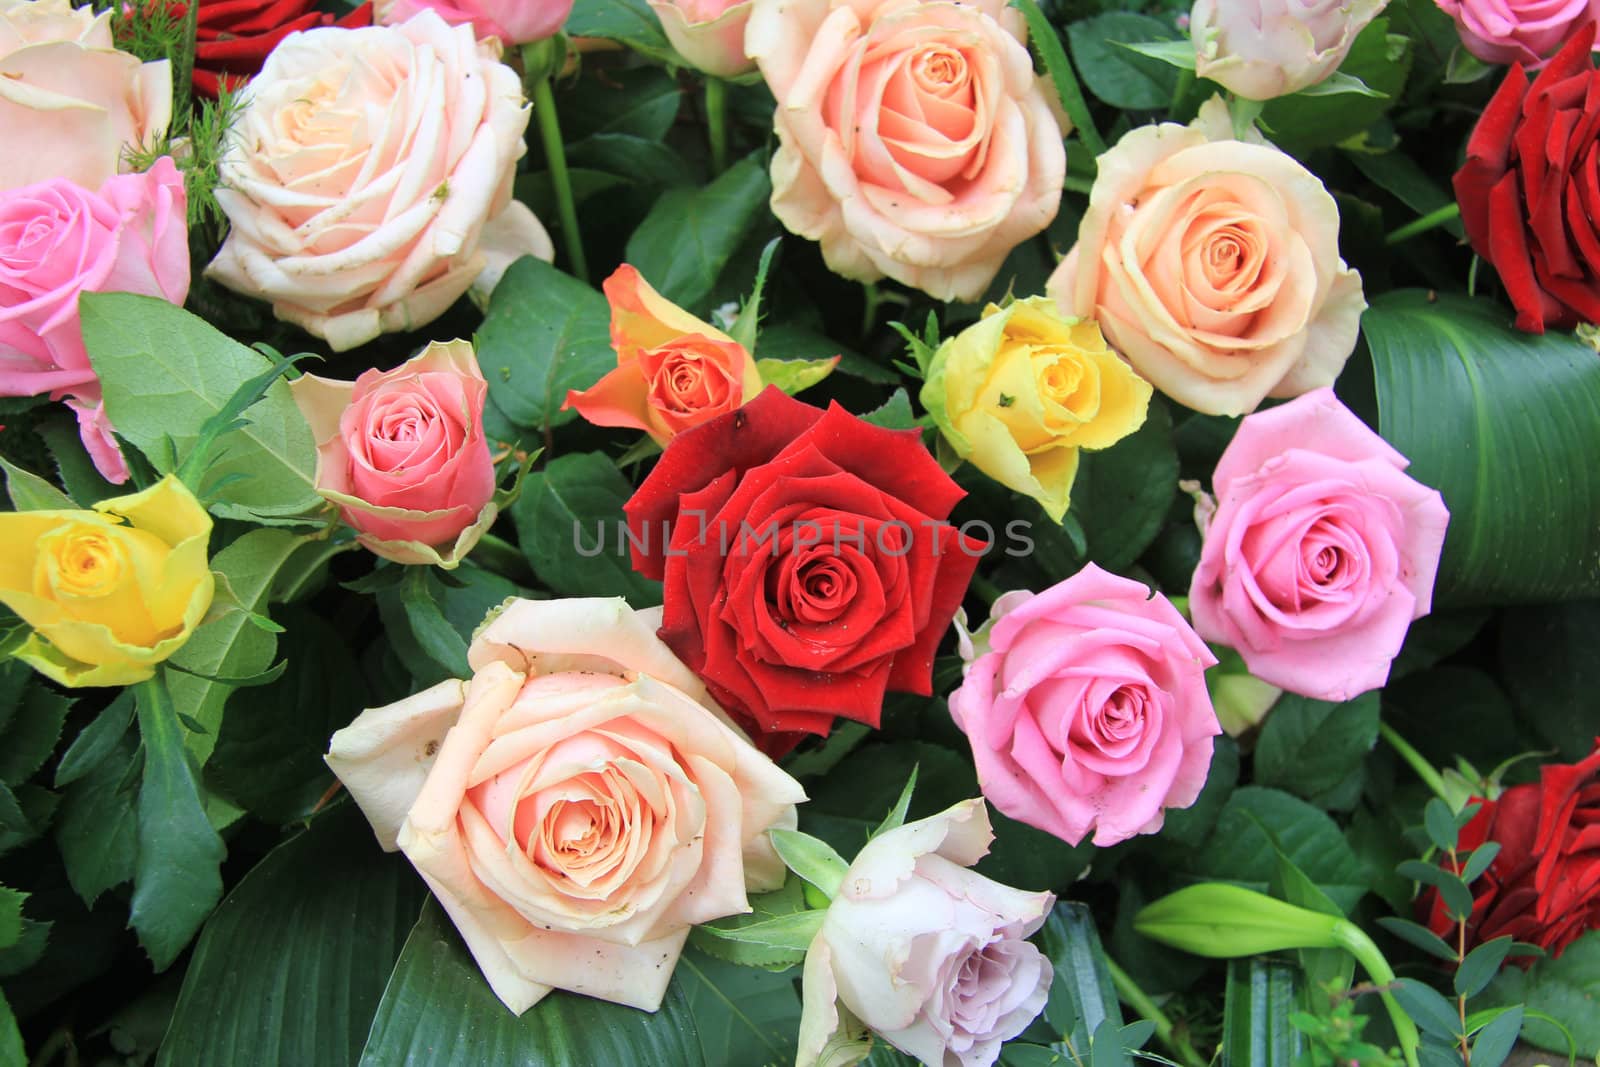 Rose bouquet in many different bright colors